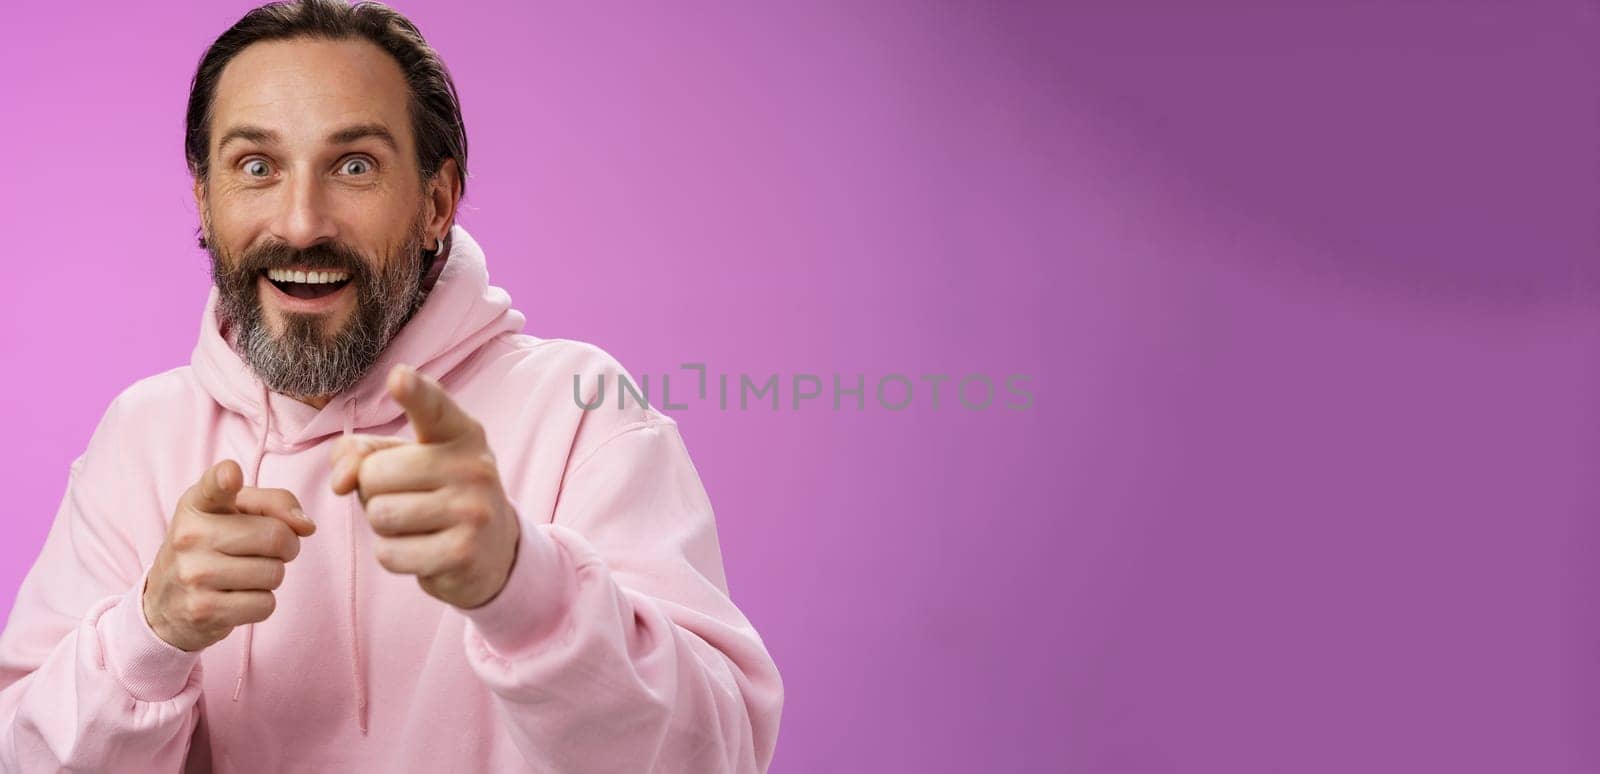 Thrilled energized charismatic happy lucky adult handsome bearded man pointing camera smiling widen eyes gazing impressed see famous person express amazement joy, purple background.